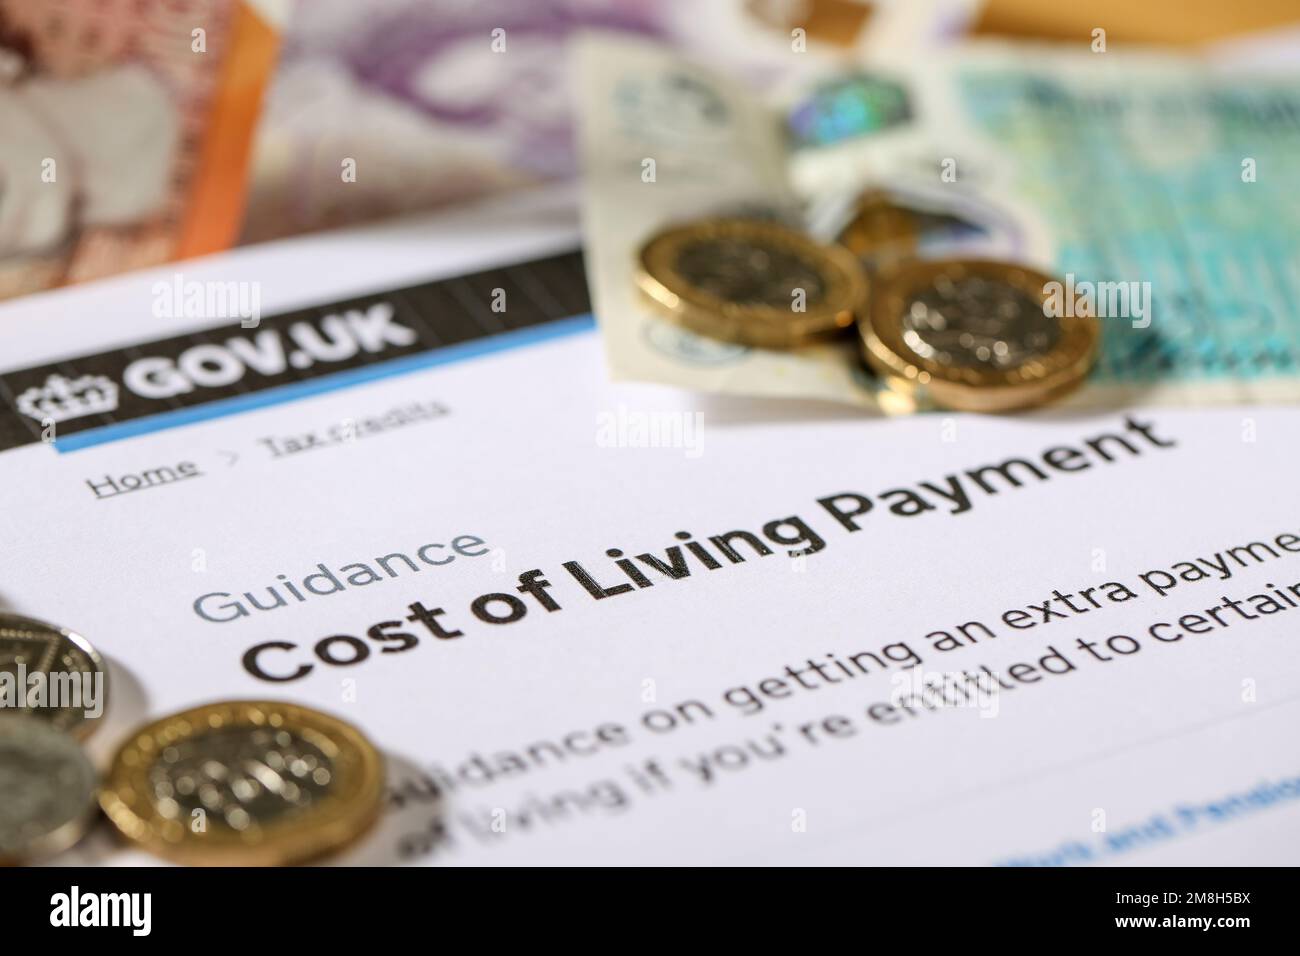 Cost of Living crisis in the UK. UK Government cost of living payment to support people with certain benifits or tax credits. Stock Photo